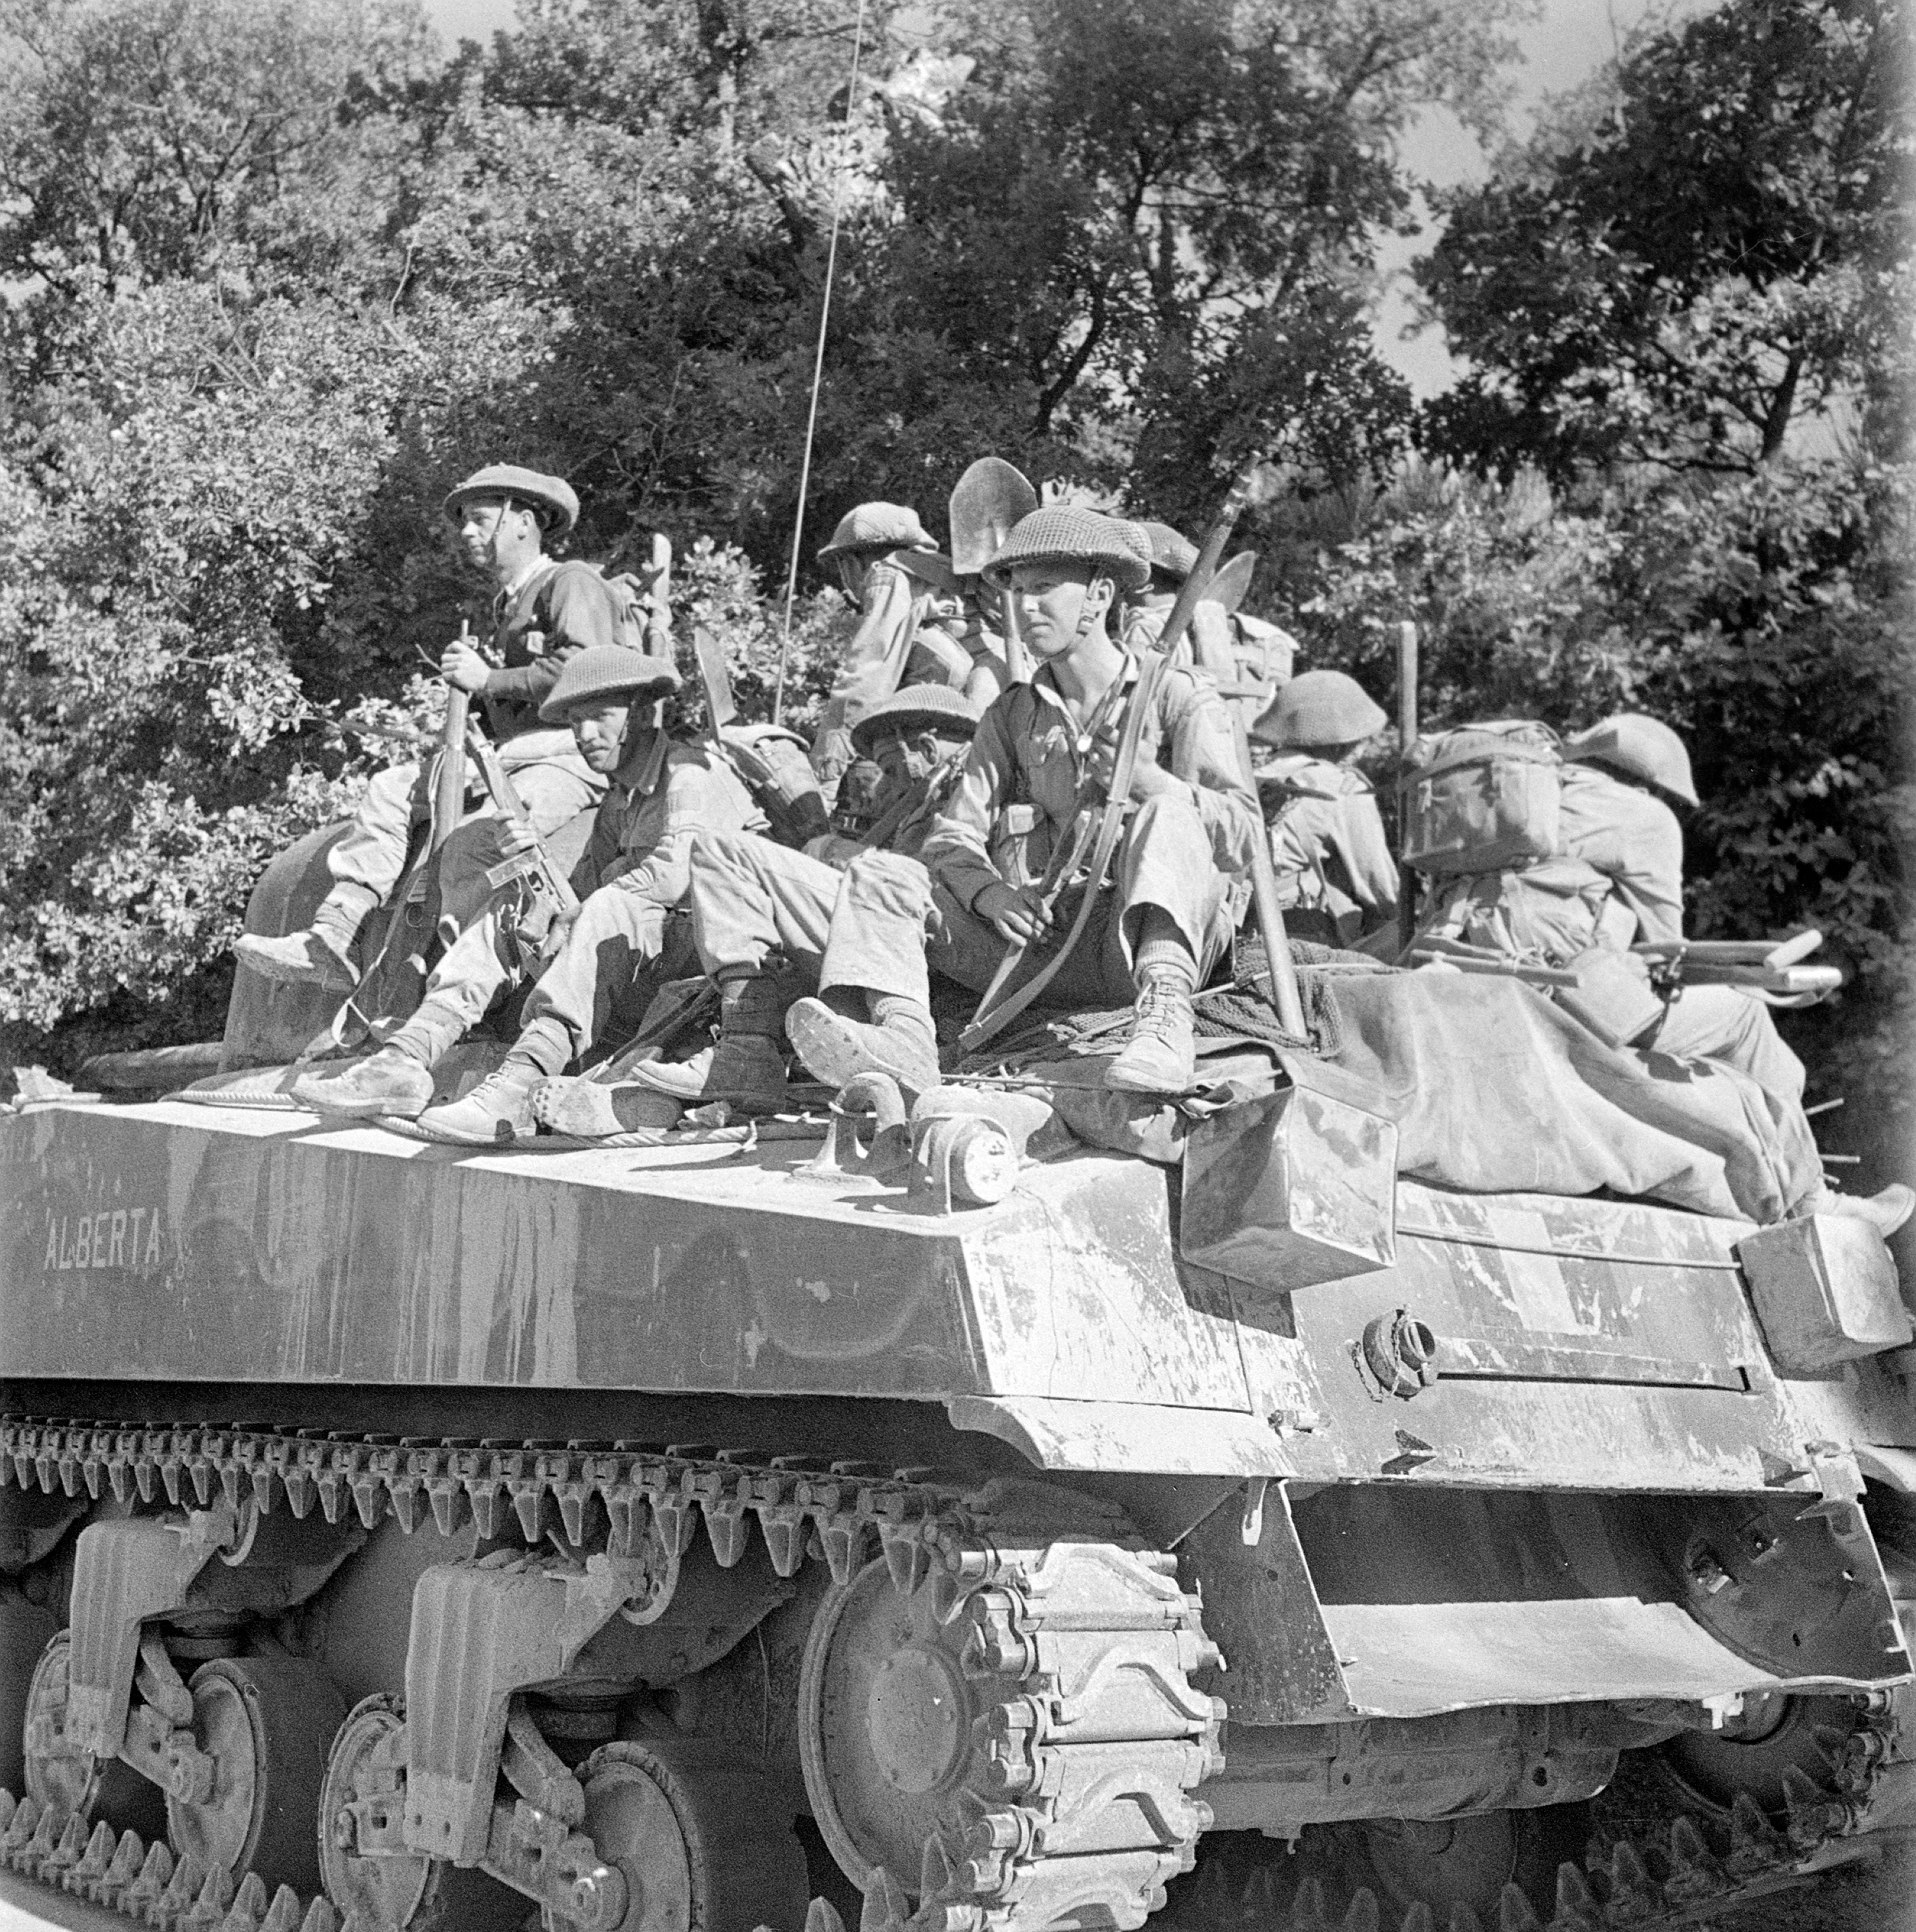 Infantrymen of the West Nova Scotia Regiment riding on a Sherman tank of the Calgary Regiment during the advance from Villapiano to Potenza, Italy, 18 September 1943.